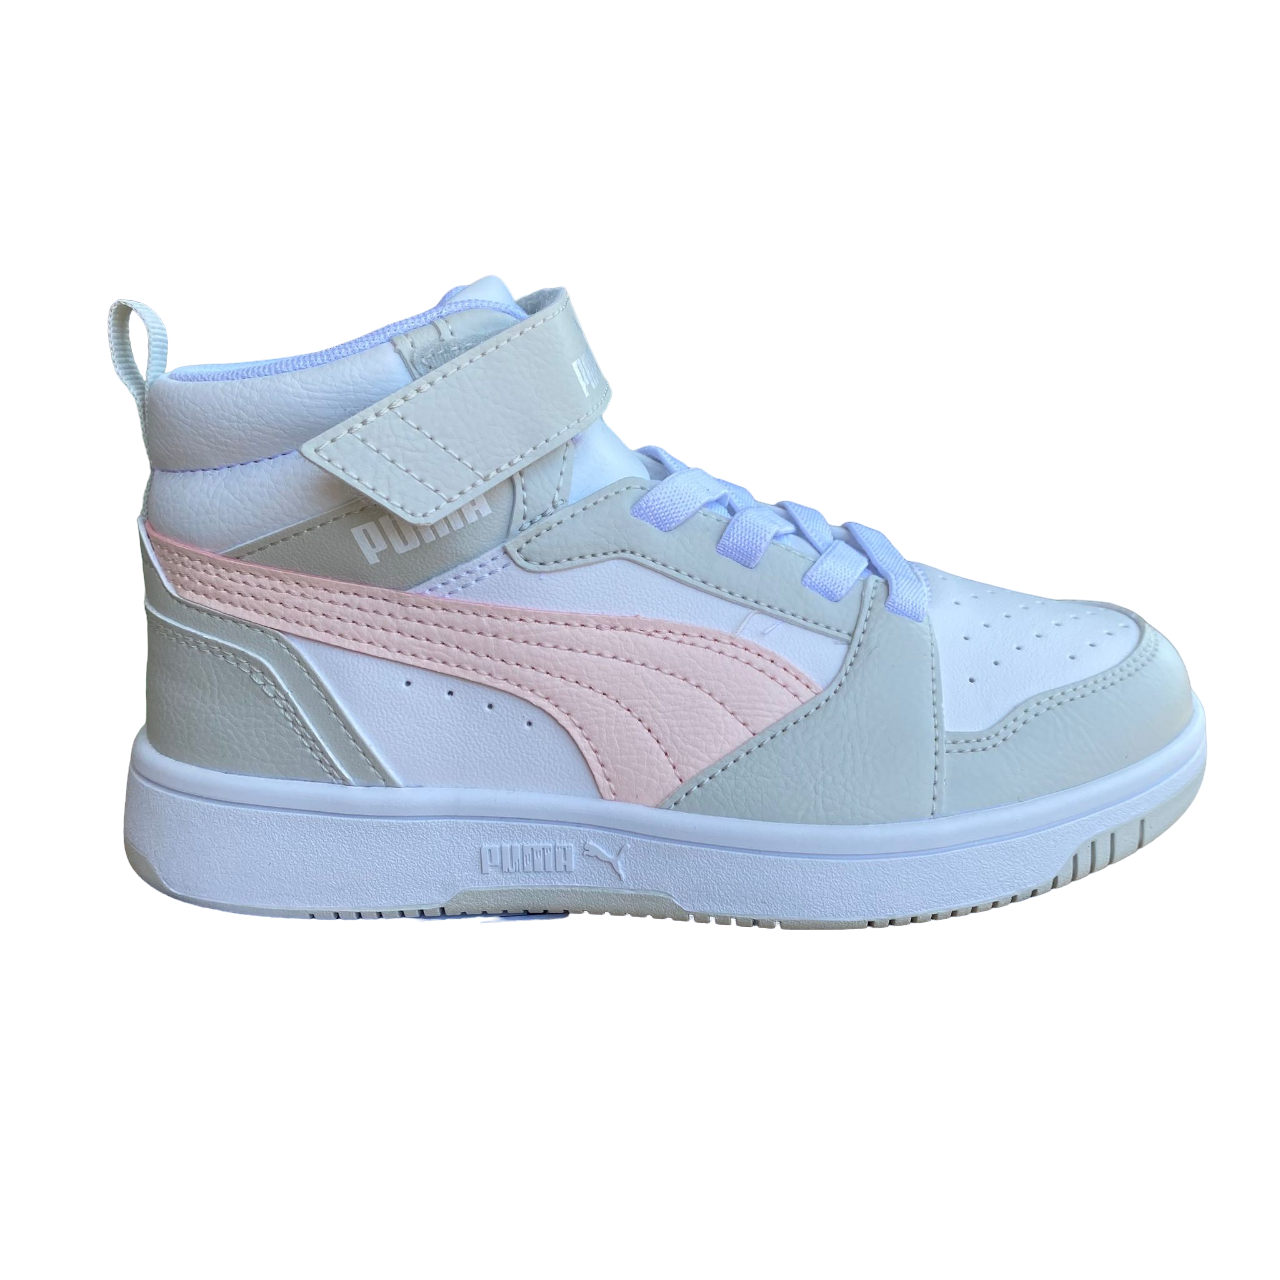 Puma girl&#39;s high shoe with lace and strap Rebound V6 AC+PS 393832-04 white-pink-grey